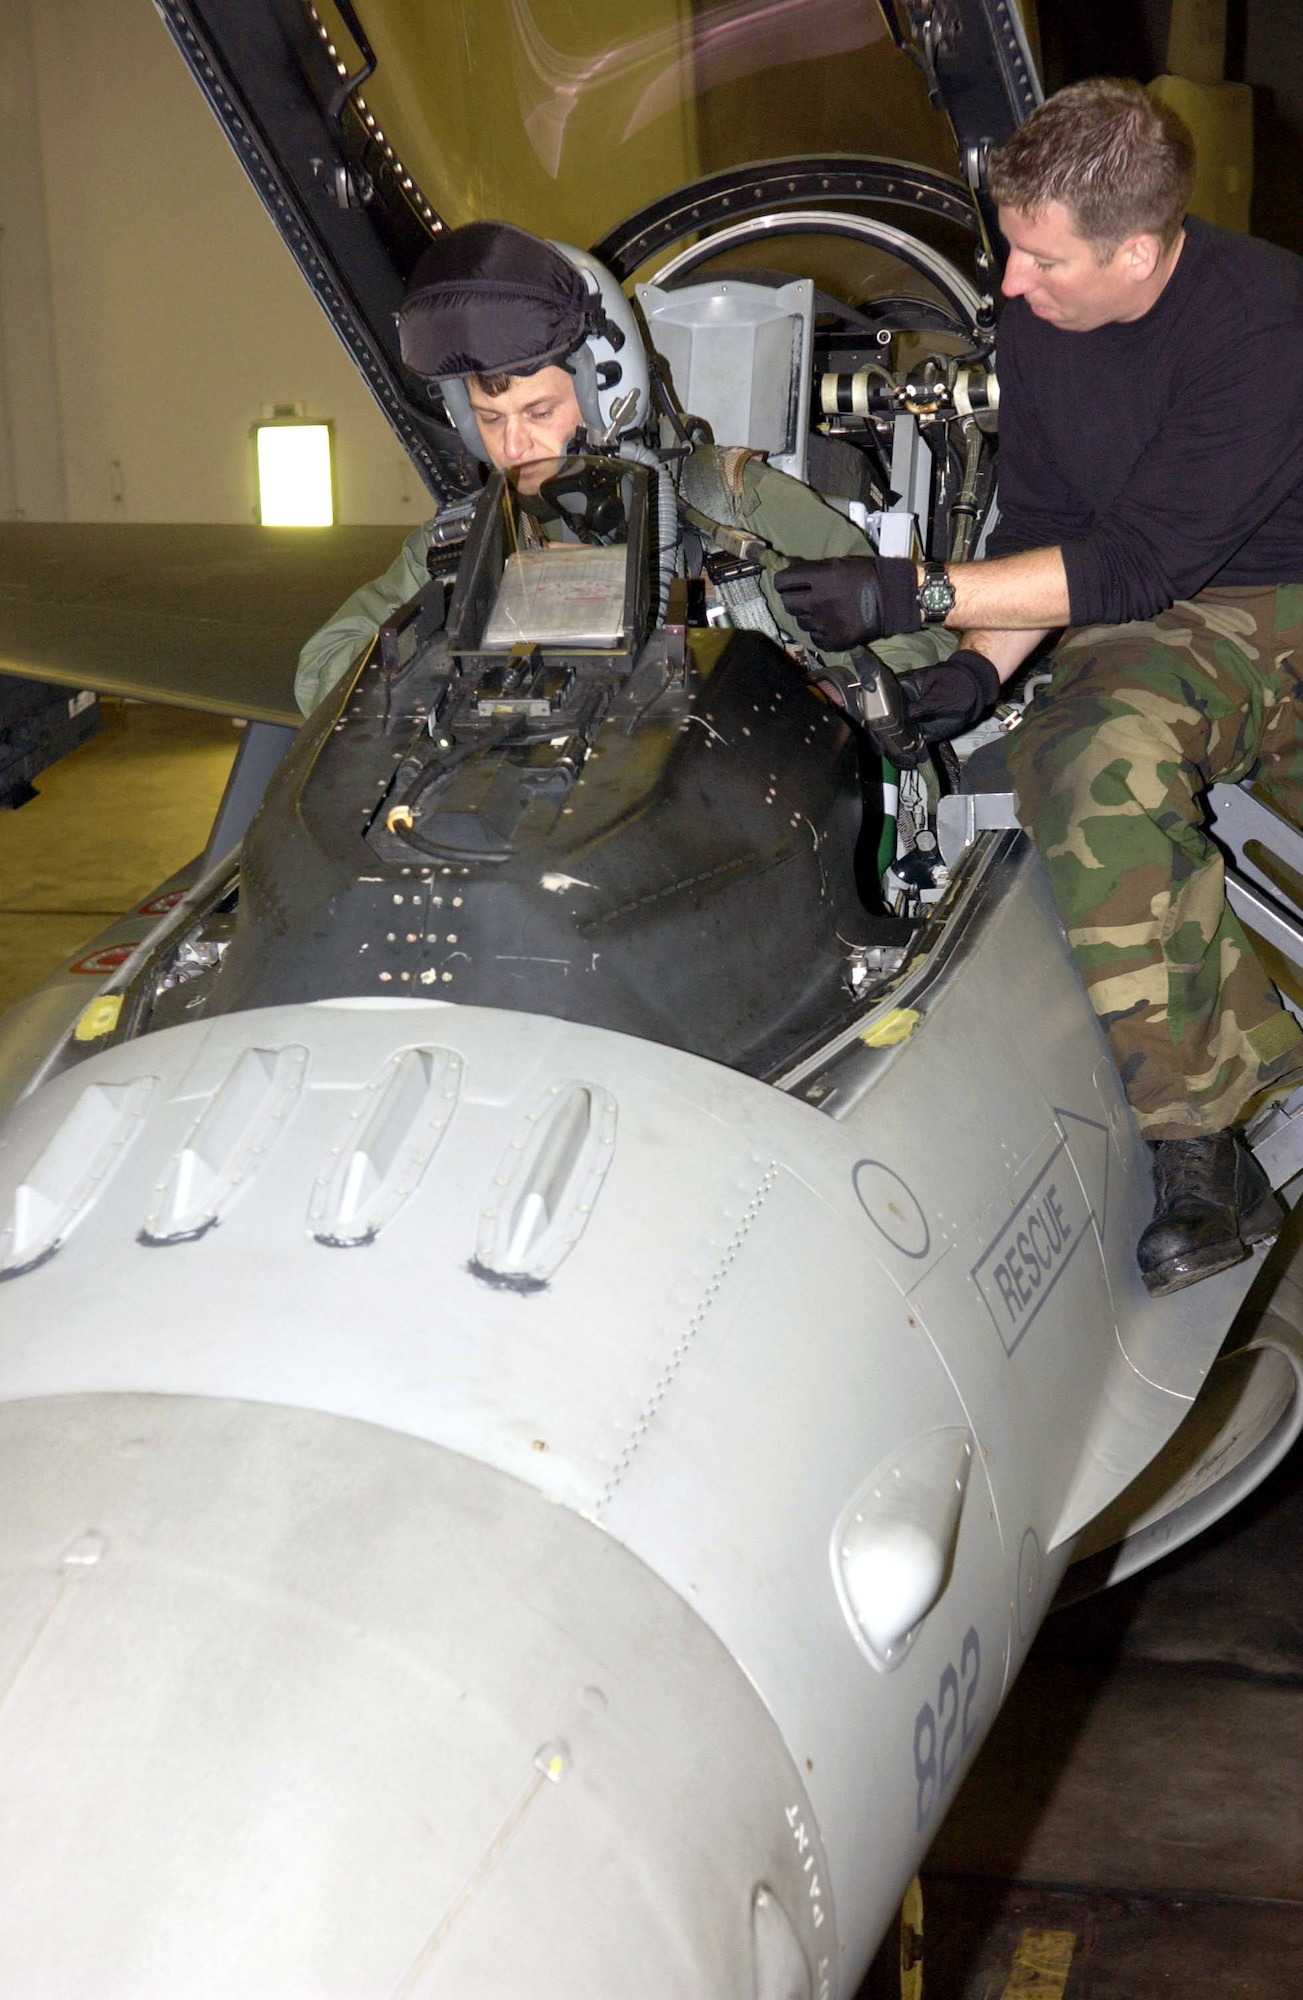 Lt. Col. Andrew Dembosky climbs into his F-16 Fighting Falcon for a mission with the 14th Fighter Squadron at Misawa Air Base, Japan, as Staff Sgt. Robert Parsons helps with preflight preparations.  The 14th FS is preparing to deploy to Iraq.  Colonel Dembosky is the inspector general for Misawa's 35th Fighter Wing.  (U.S. Air Force photo/Senior Airman Robert Barnett)